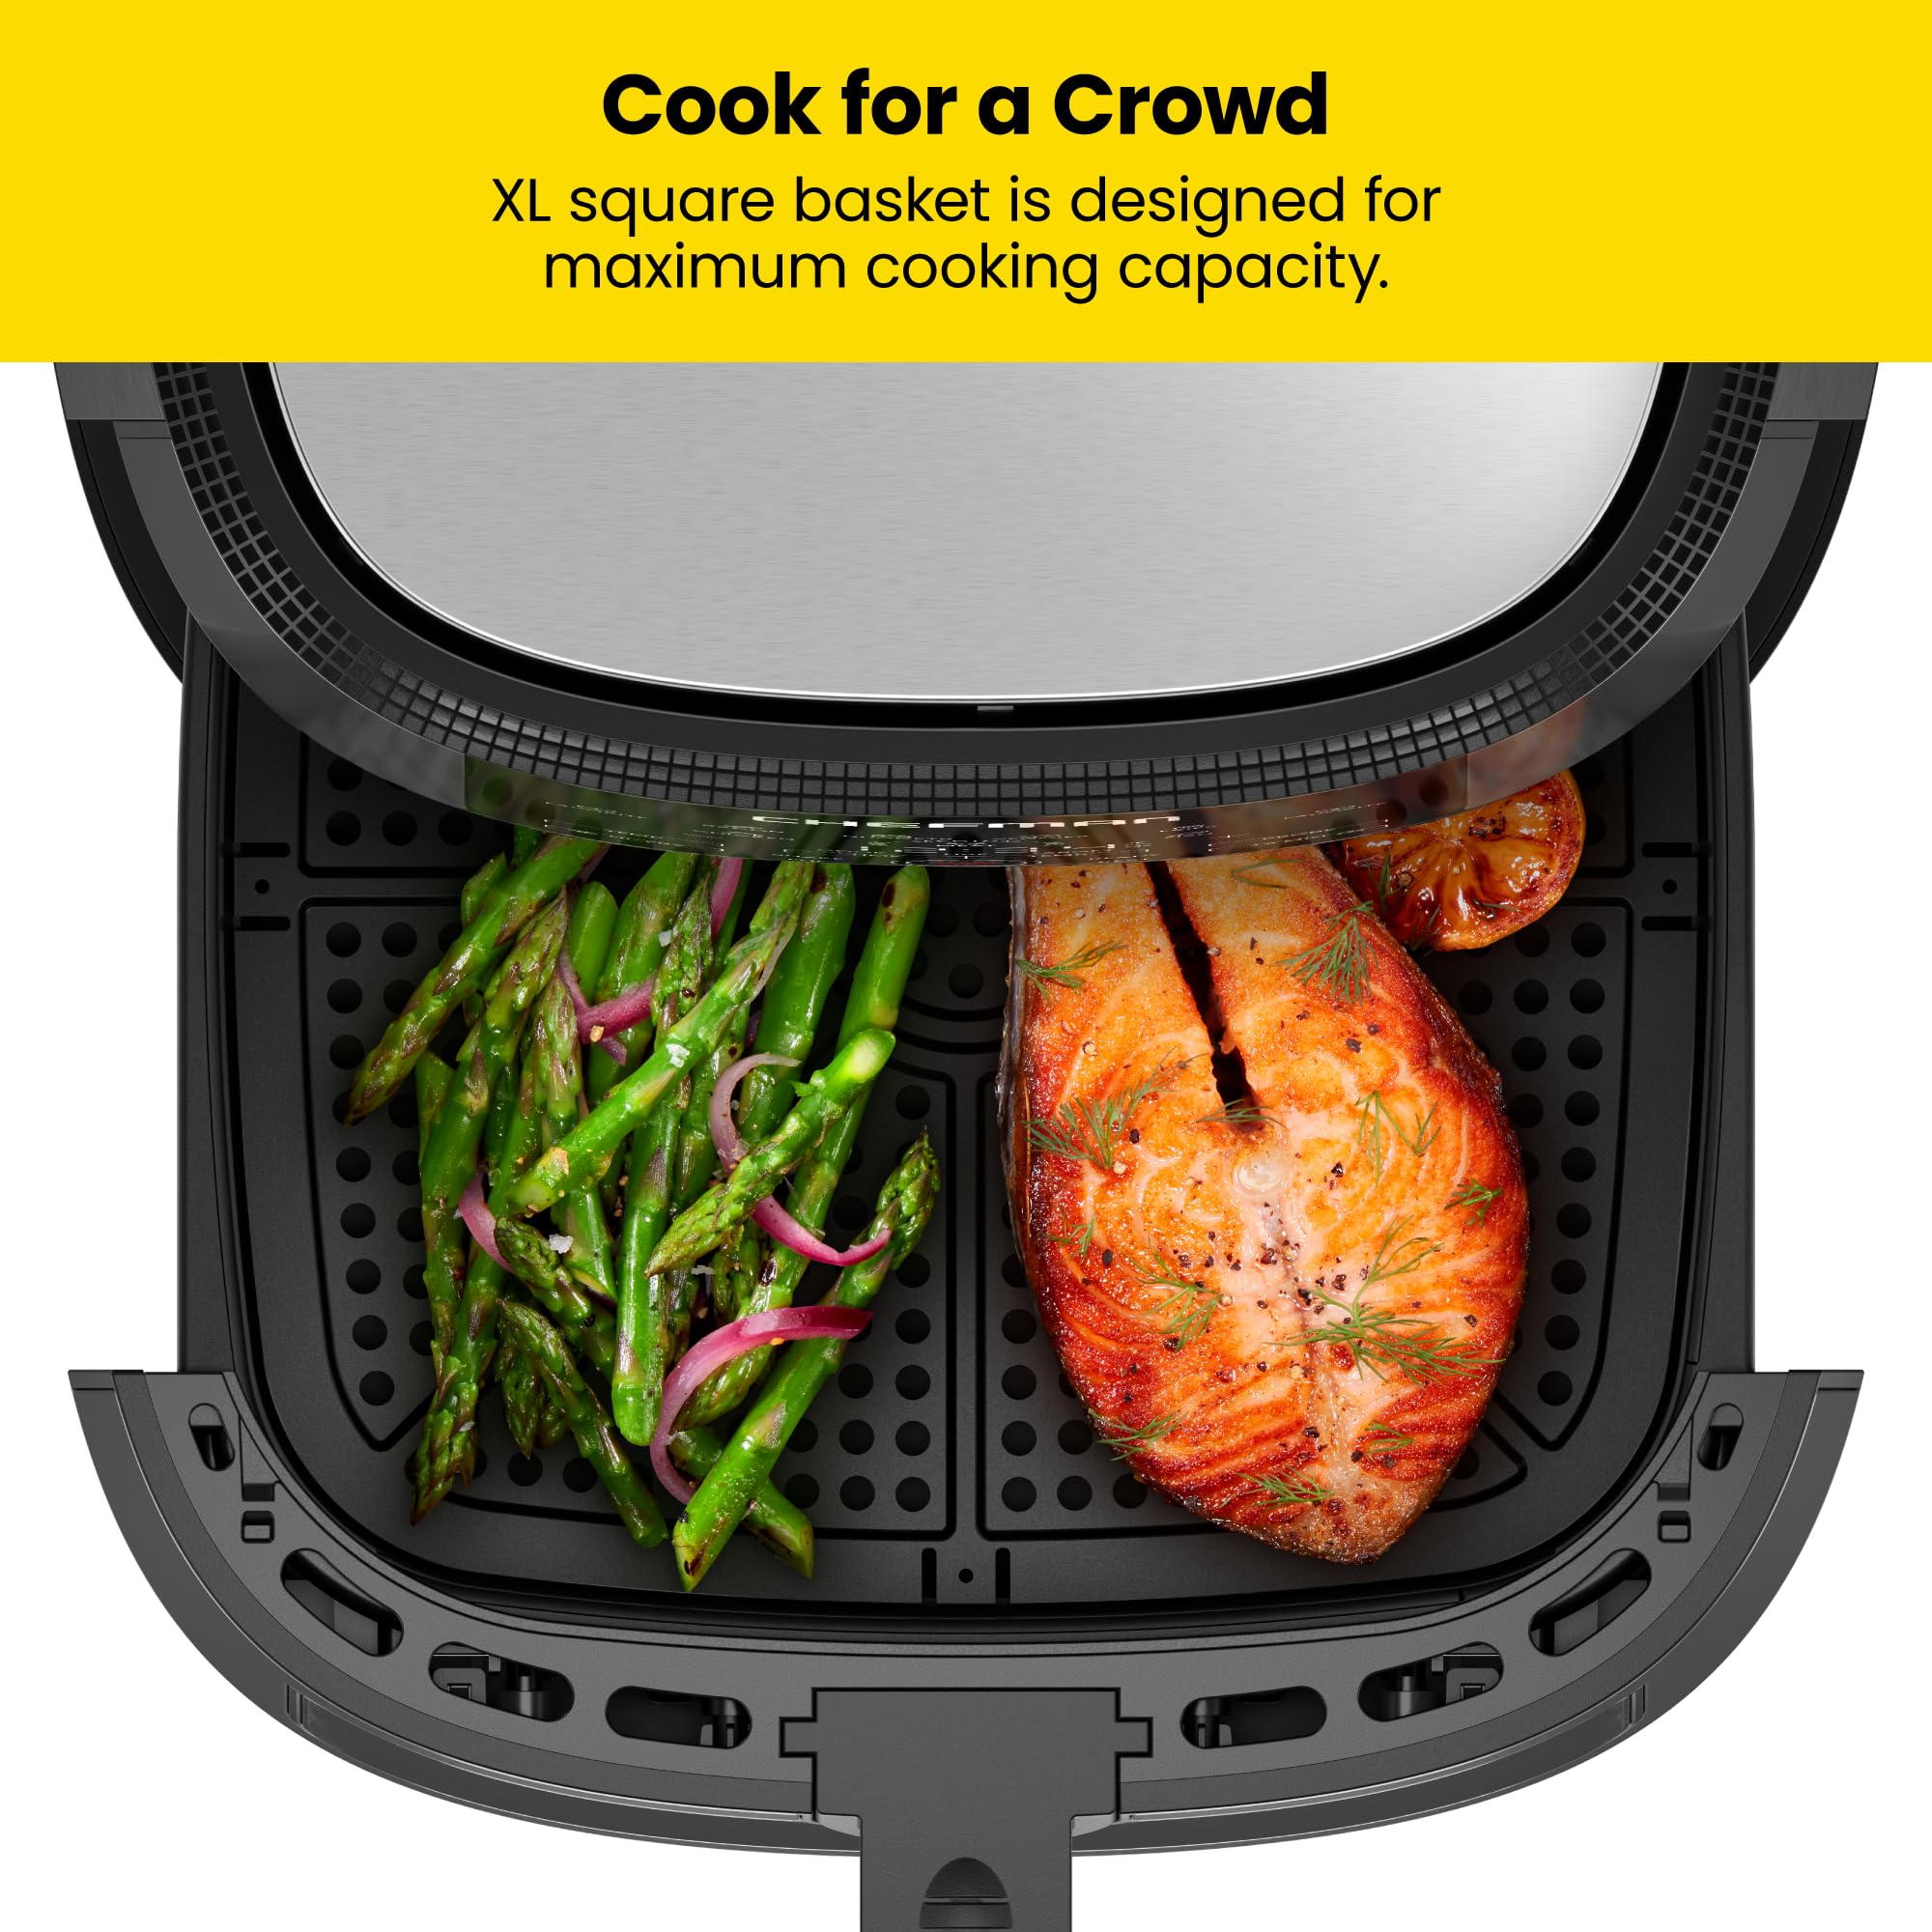 CHEFMAN Easy-View Air Fryer – 8 Qt Family Size with Viewing Window, One-Touch Digital Control with 4 Presets, Nonstick & Dishwasher Safe, Broil, Roast, Dehydrate, Bake, Auto-Shutoff, Stainless Steel